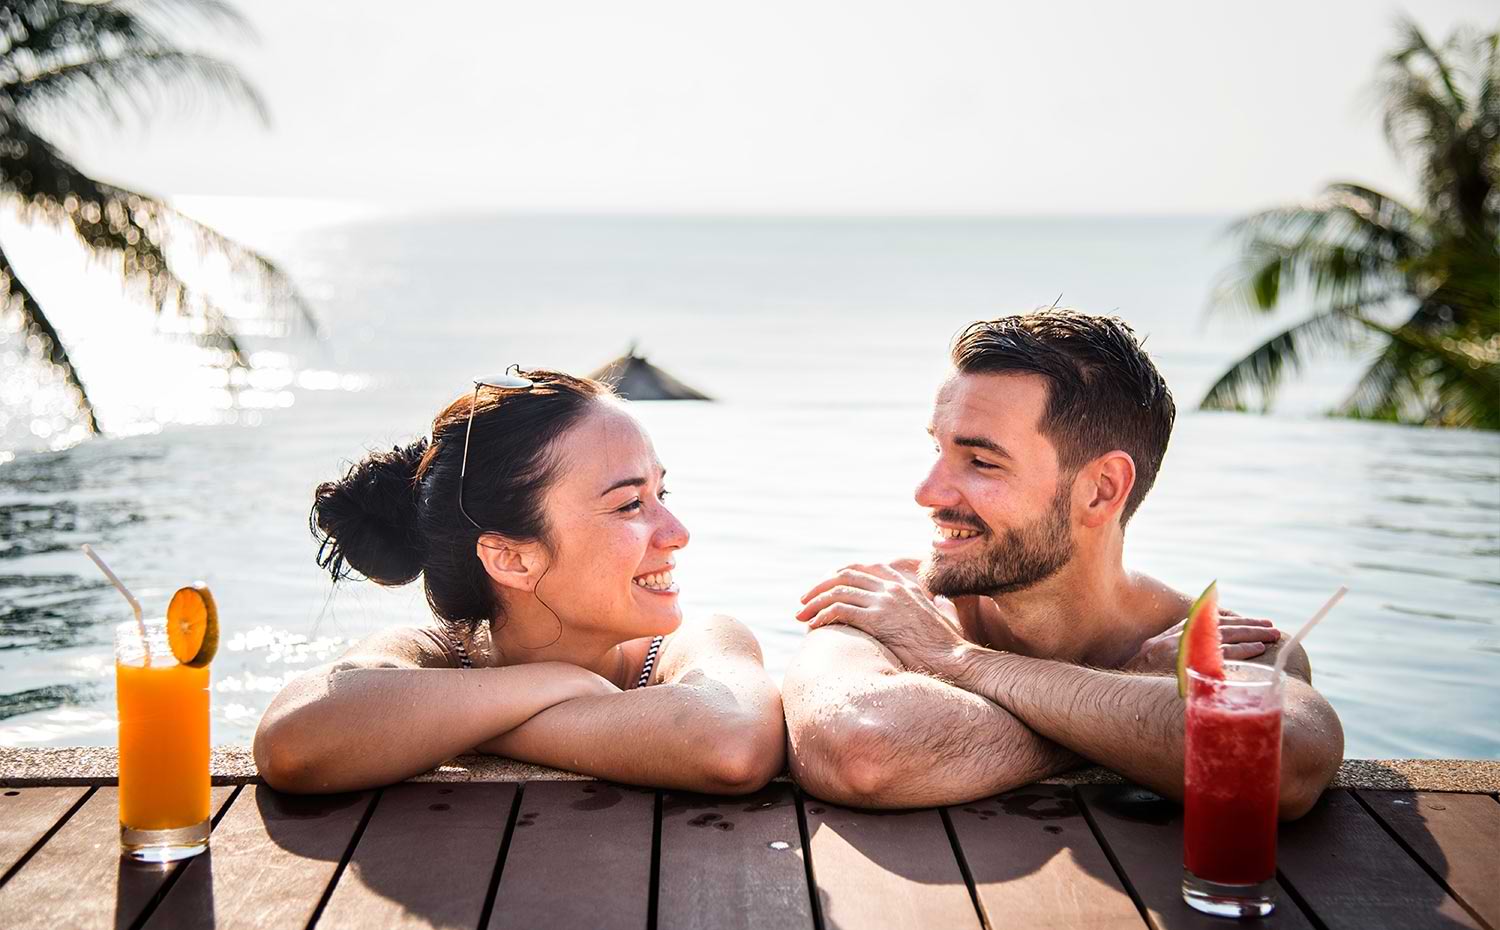 close up of a woman and man in water resting their arms on a small boardwalk where their drinks sit, they both look at each other smiling